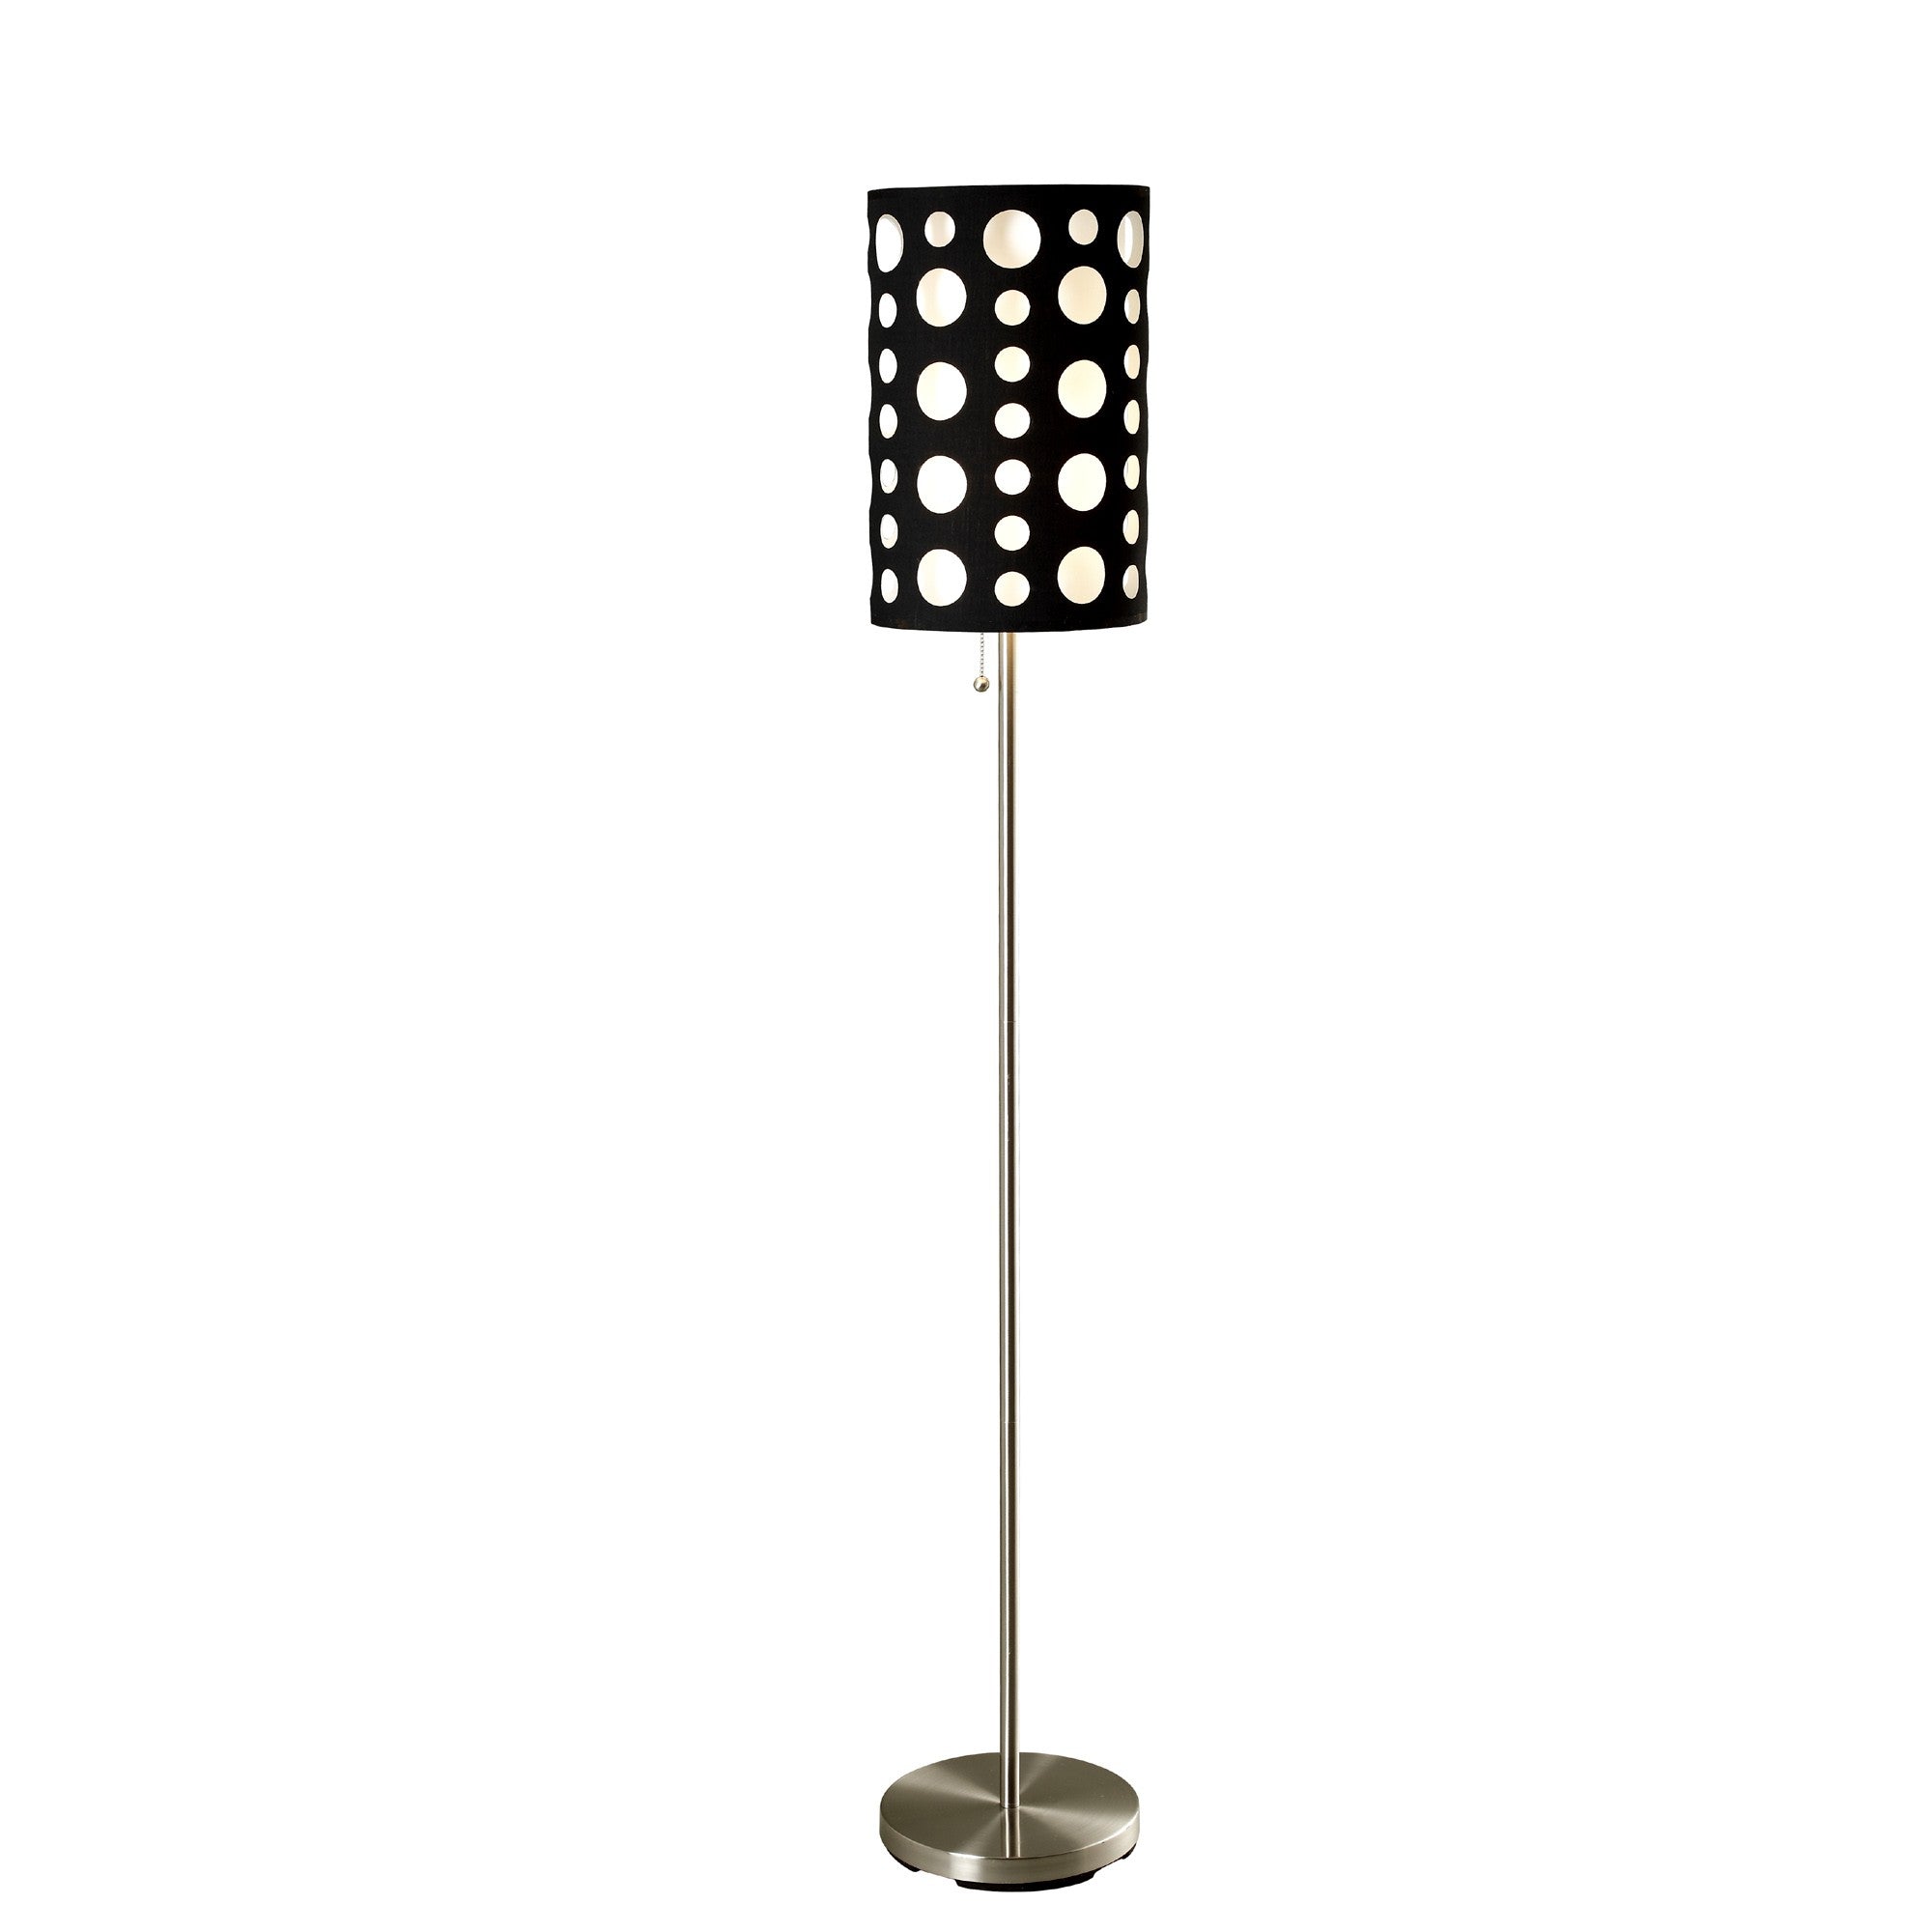 66" Steel Novelty Floor Lamp With Black And White Drum Shade